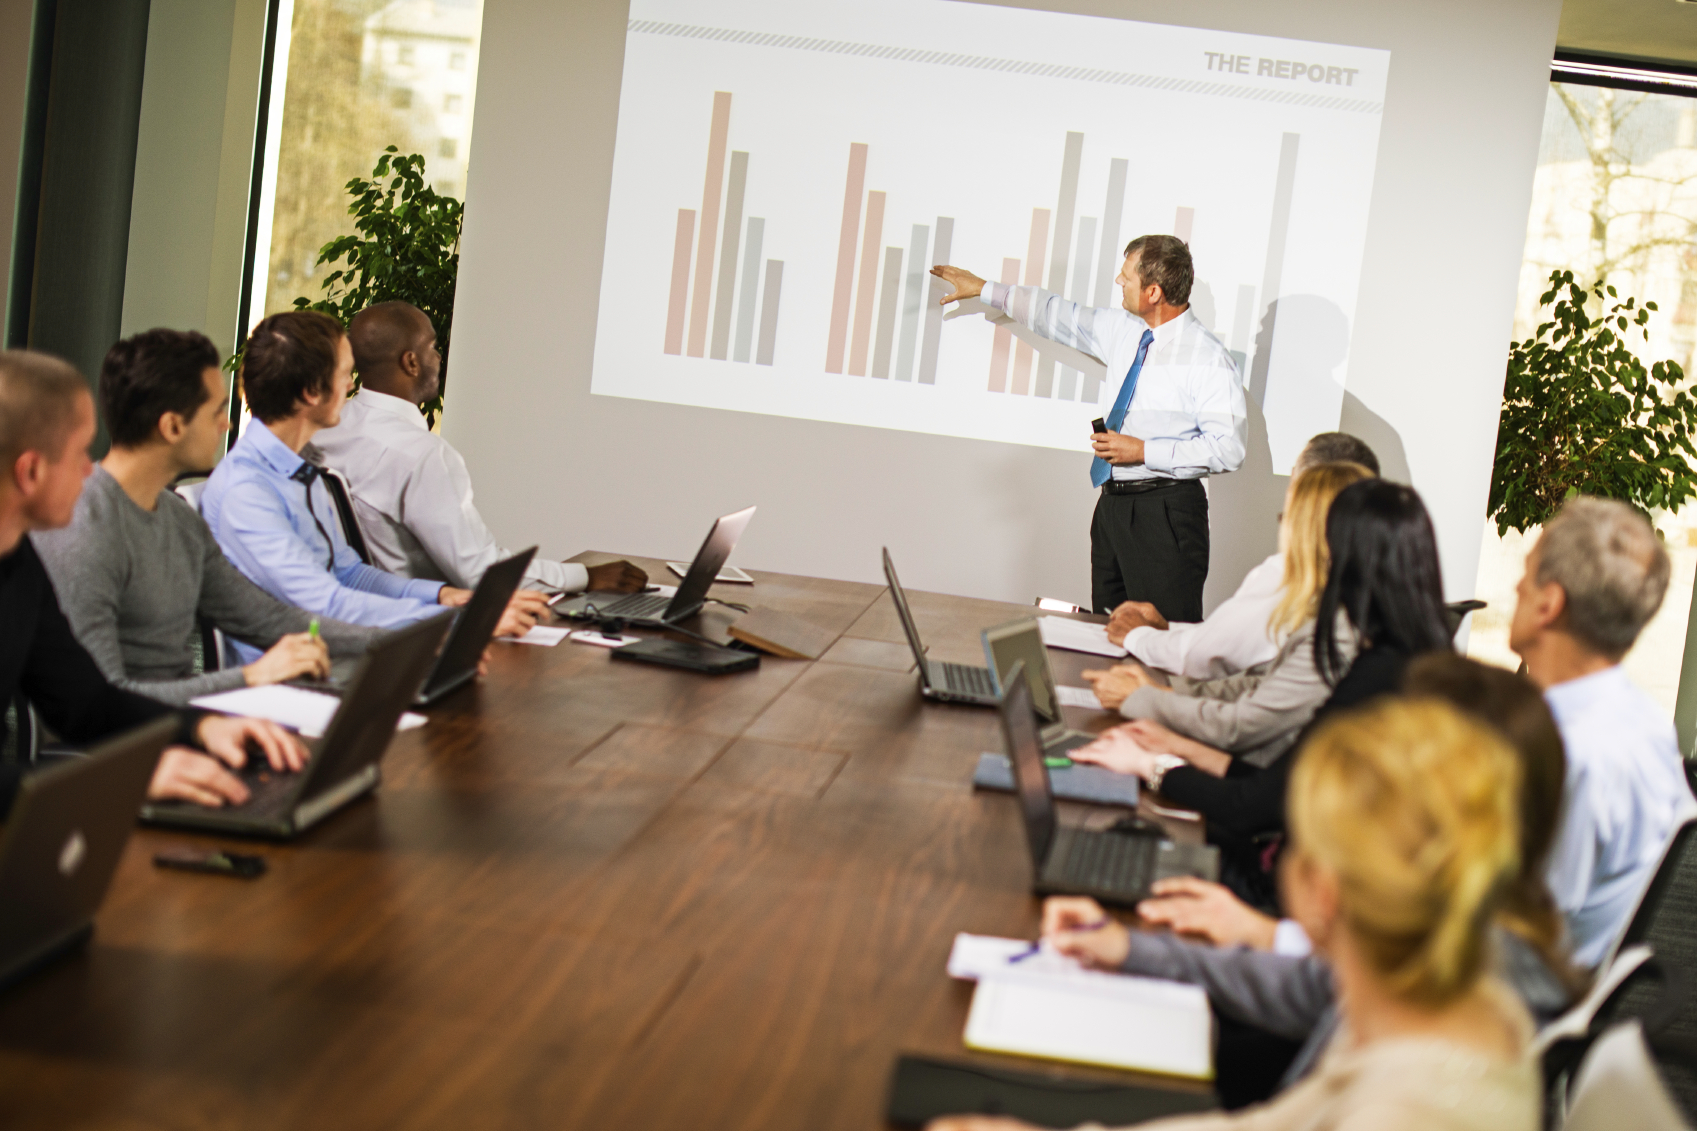 what is your understanding about powerpoint presentation